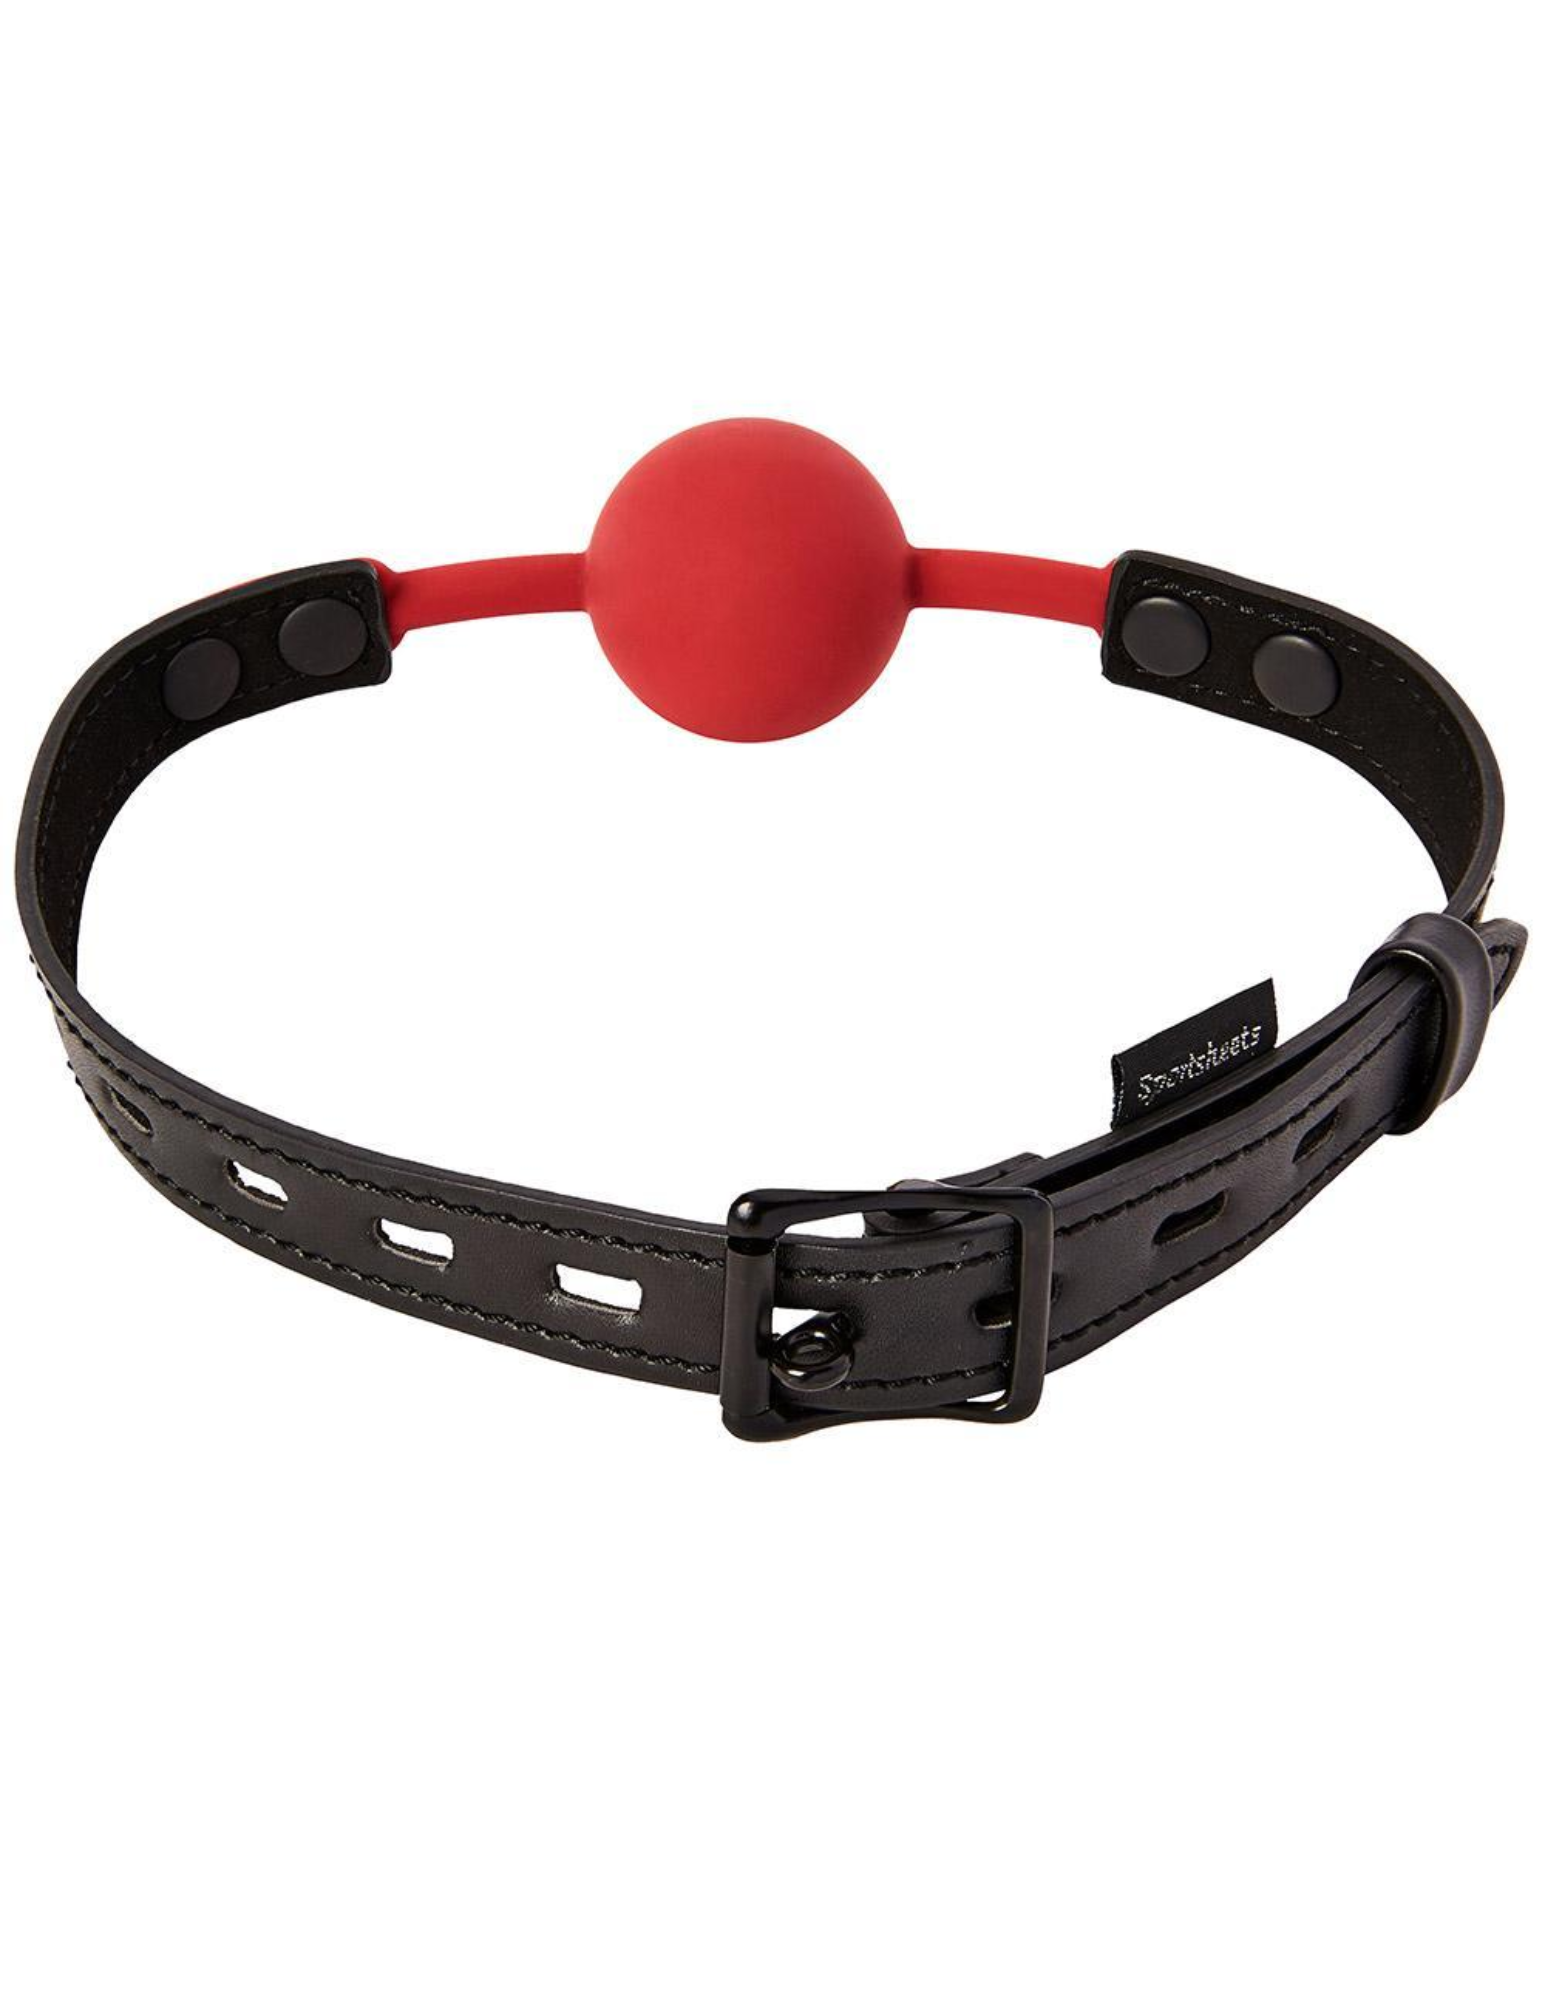 Back view of the ball gag shows that it is adjustable and the size of the ball.